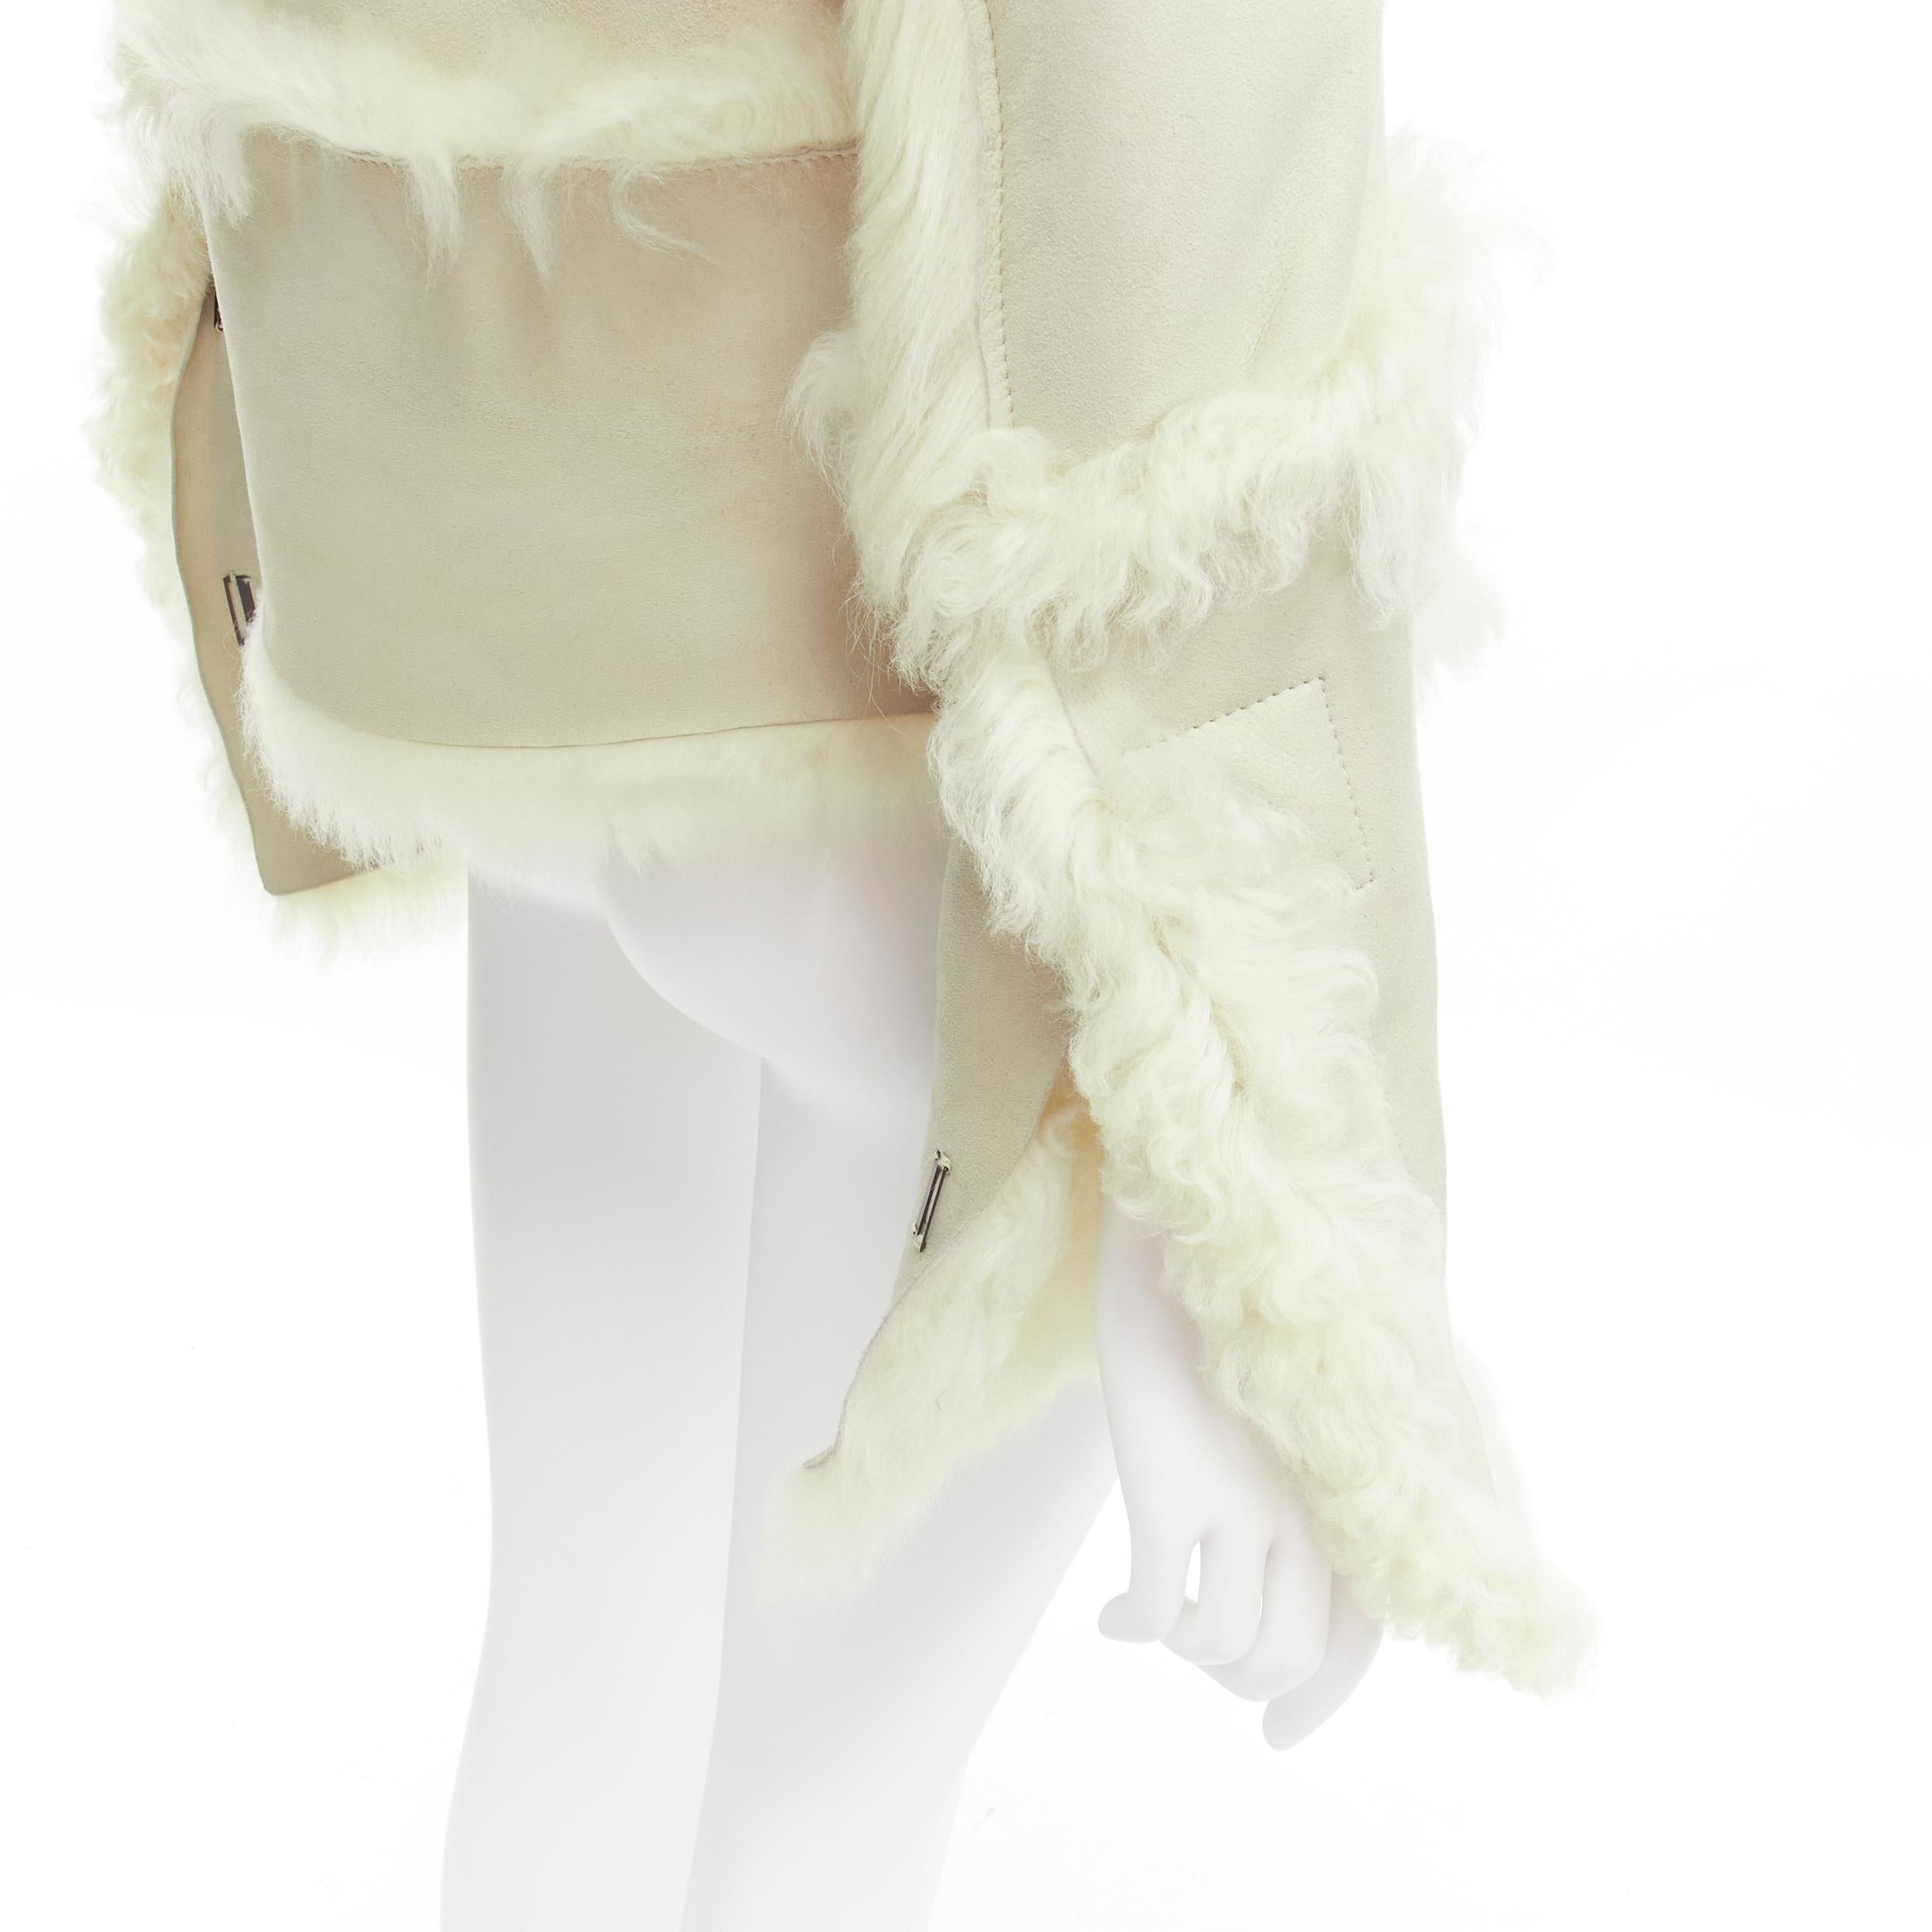 GUCCI Tom Ford cream shearling fur lined suede flared sleeve coat IT38 XS
Reference: TGAS/C02000
Brand: Gucci
Designer: Tom Ford
Material: Shearling, Leather
Color: Cream
Pattern: Solid
Closure: Hook & Bar
Lining: Cream Fur
Made in: